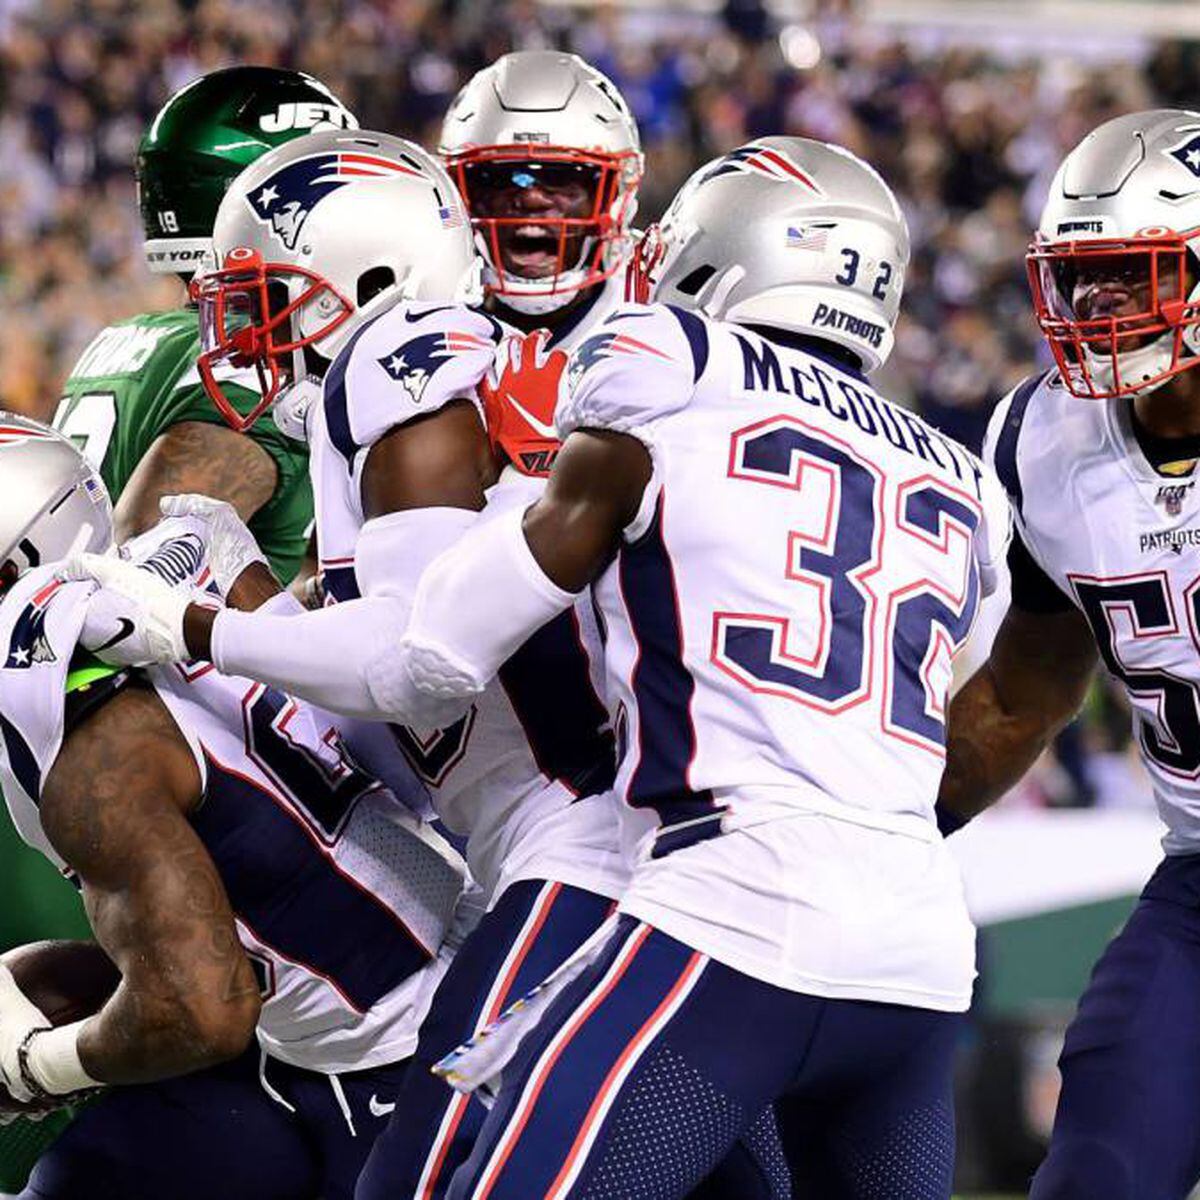 Patriots looking to avoid 0-3 start against Jets